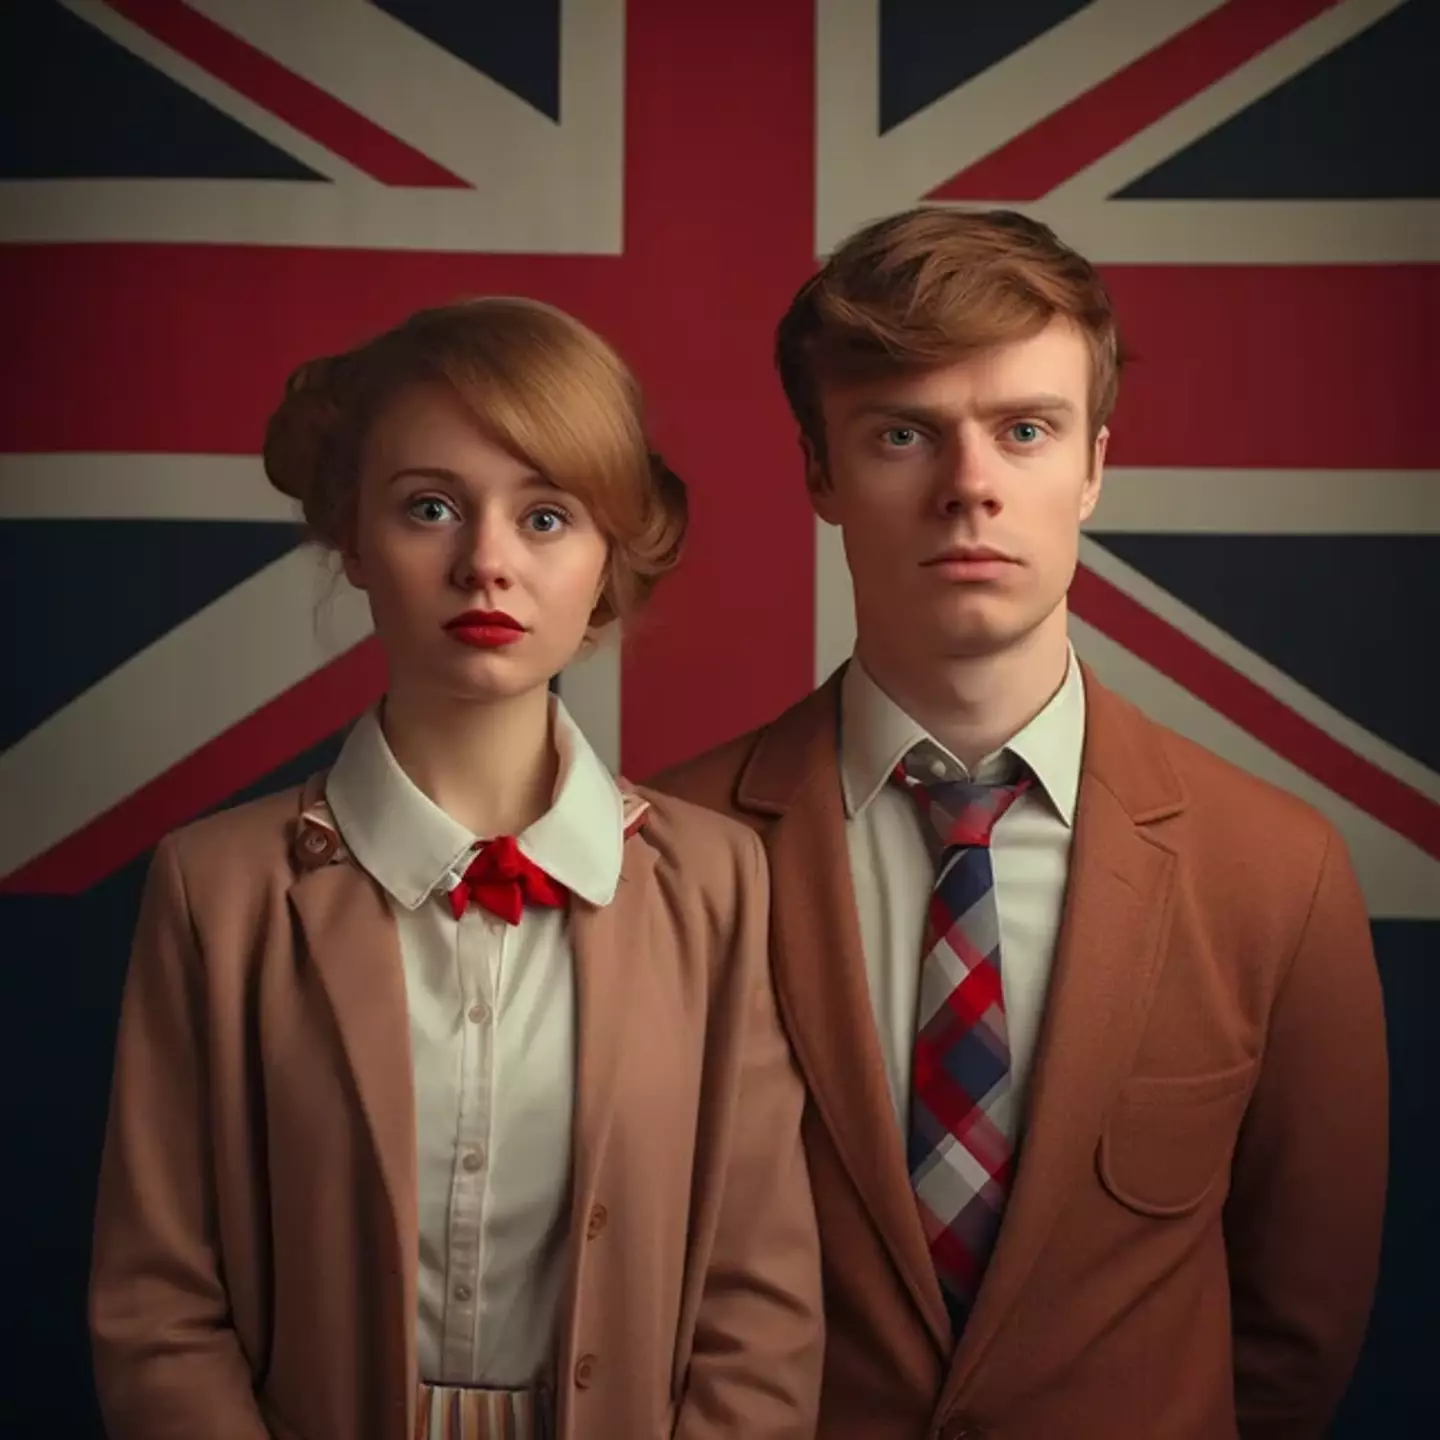 Brits questioned why the average couple look like something from the Peaky Blinders.